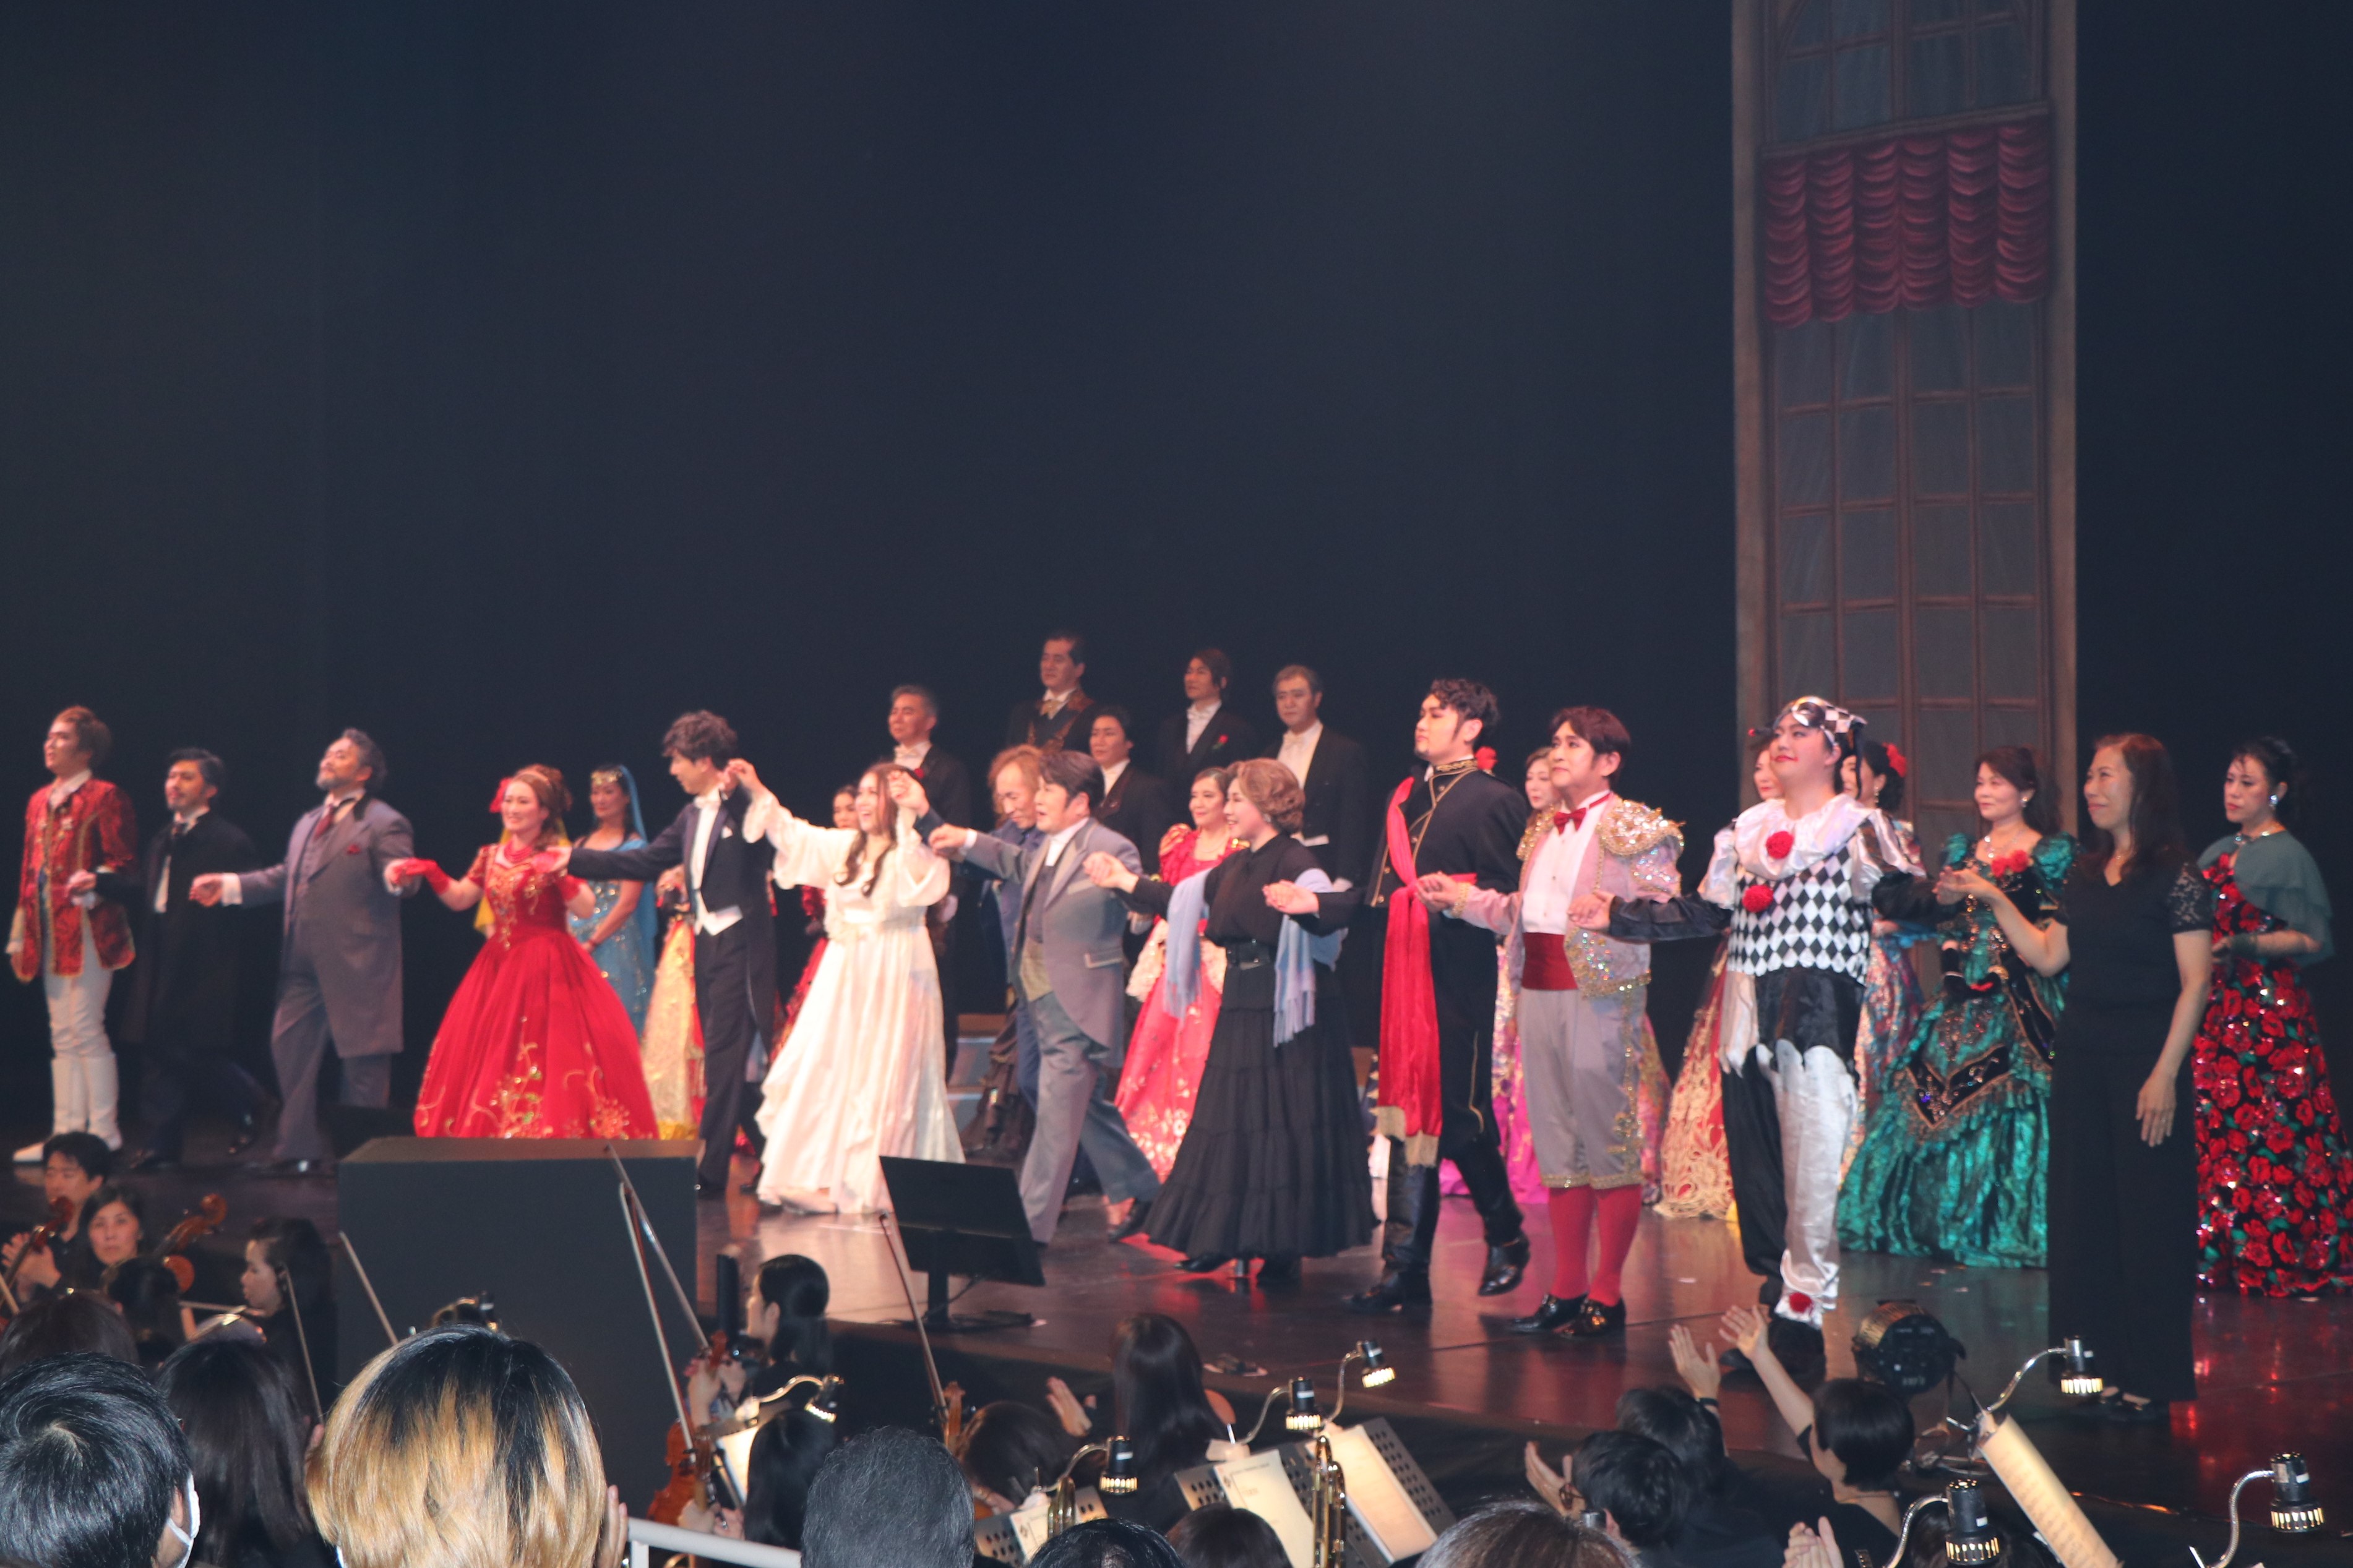   Performers taking a curtain call